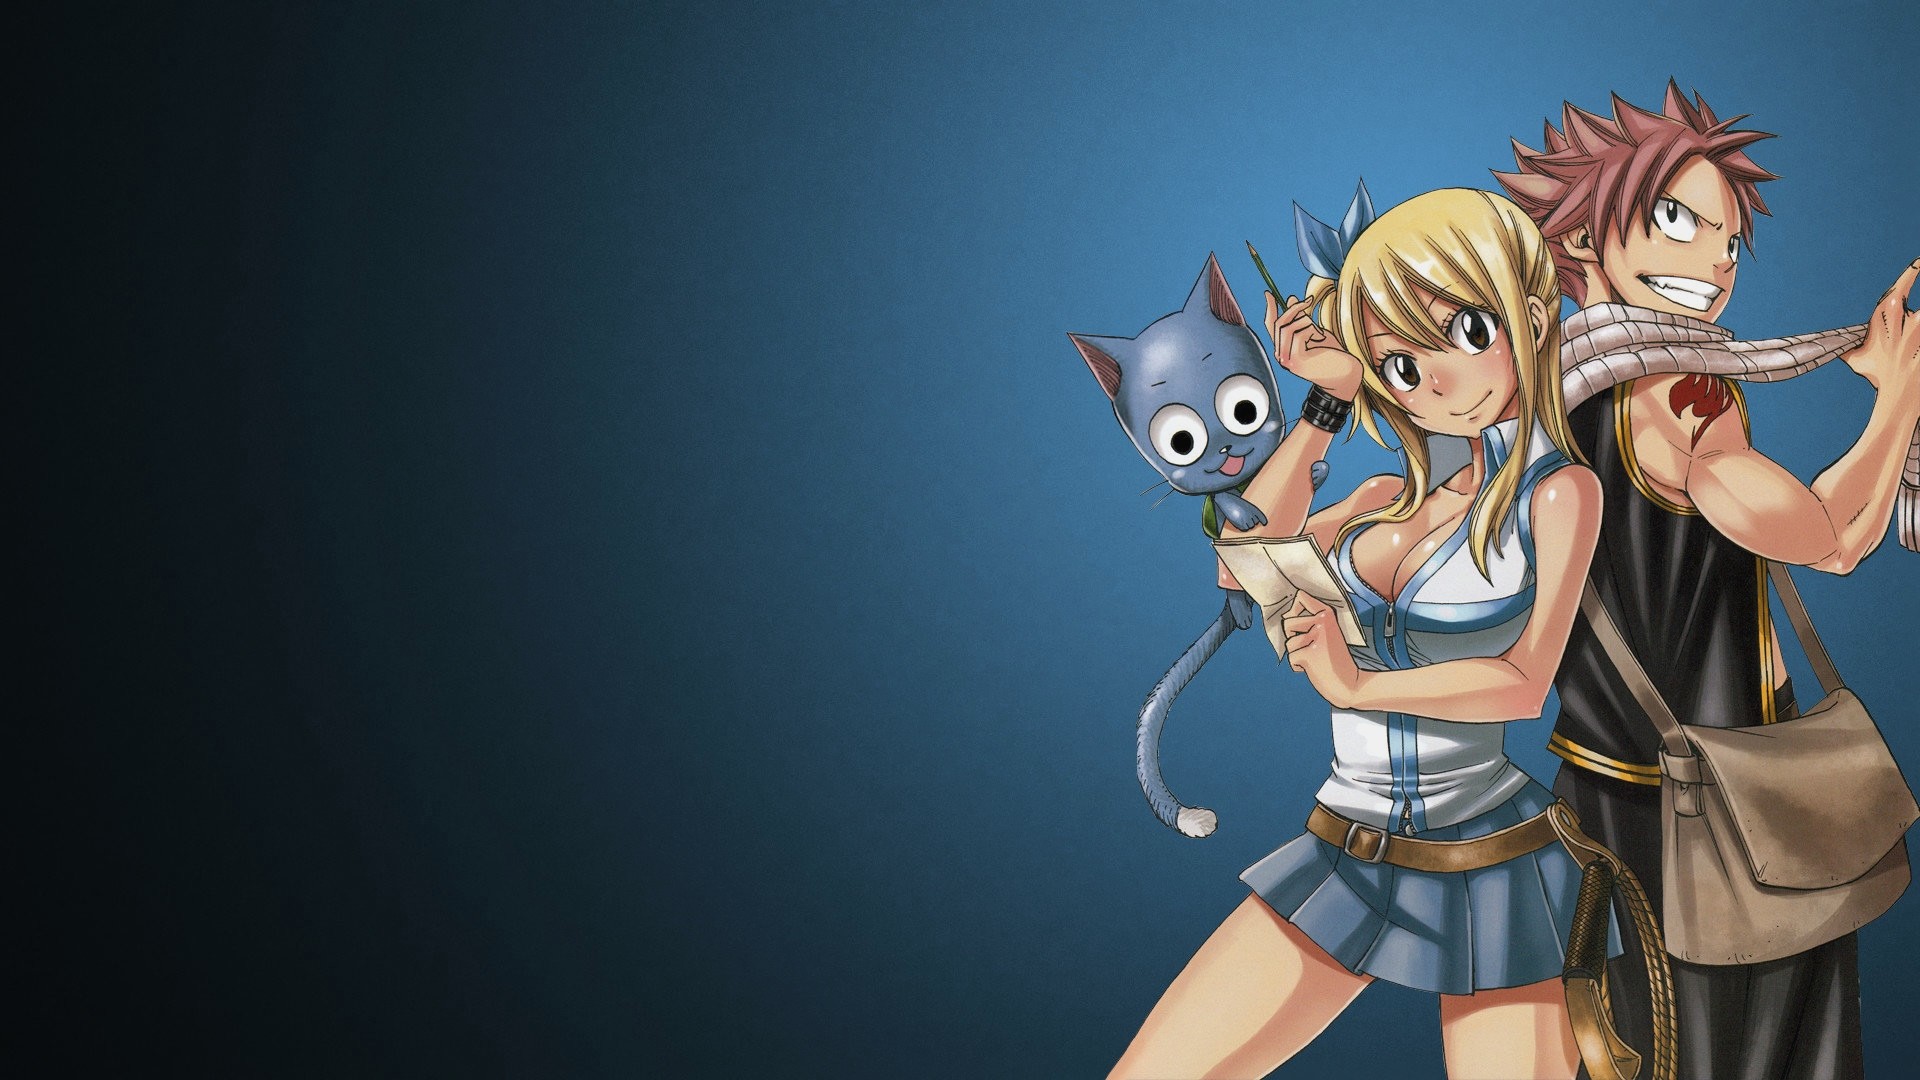 1920x1080 High resolution Fairy Tail hd wallpaper ID for puter